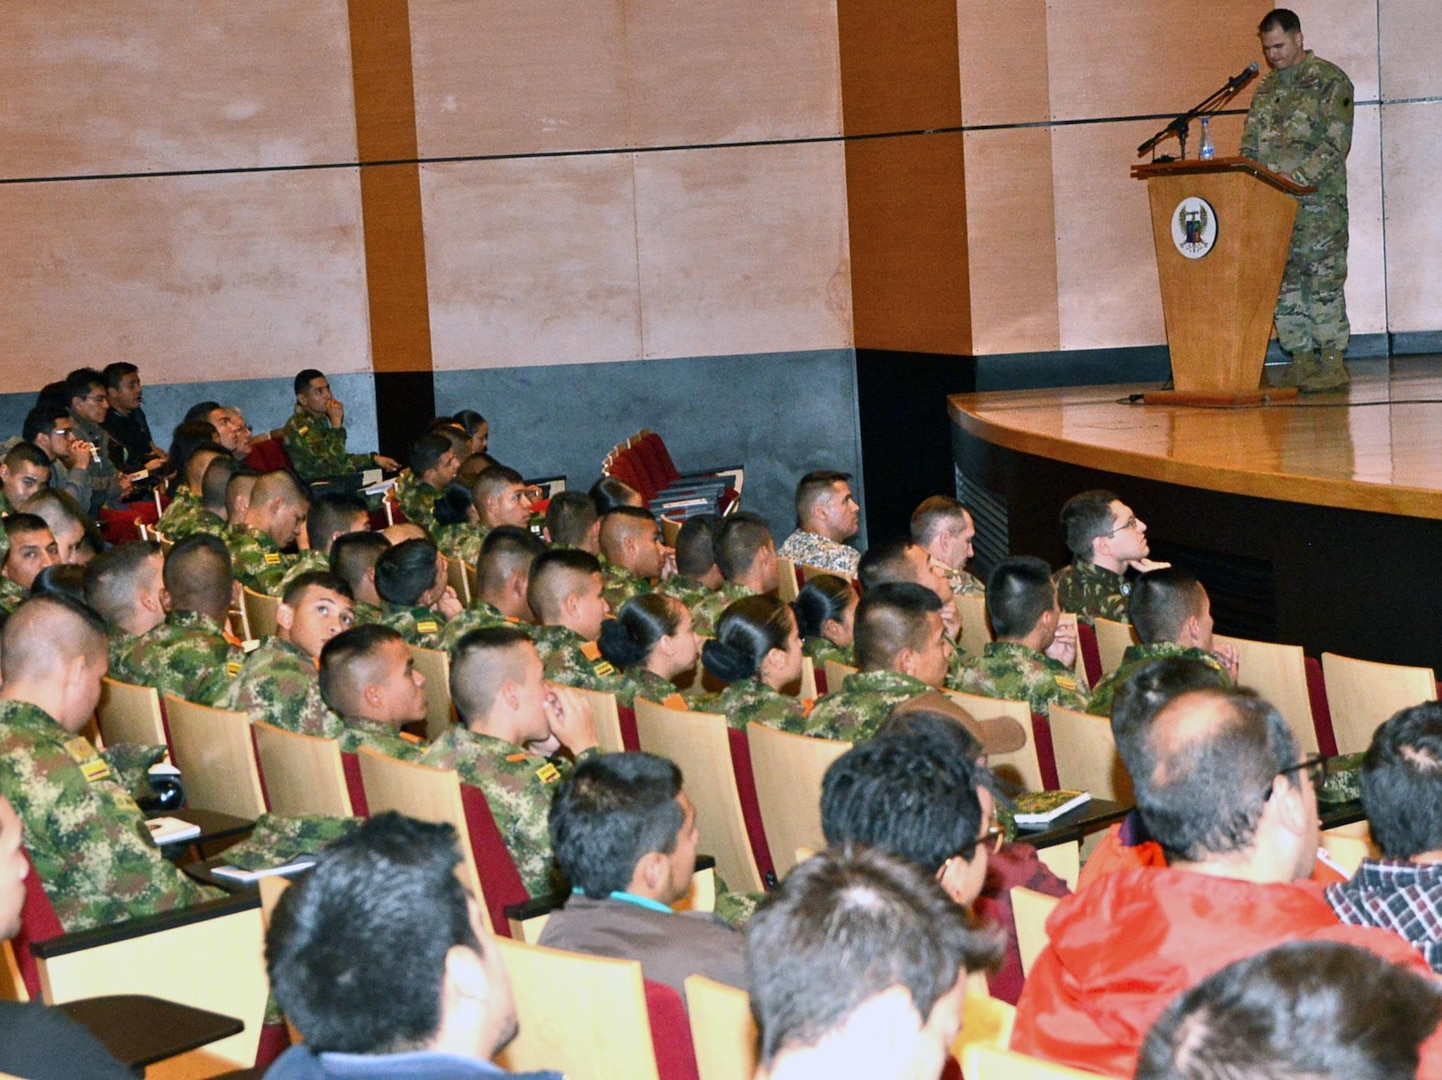 Army South's Assistant Chief of Staff Engineer (ACSENG) directorate spoke at the first International Technical Workshop of Military Engineering, hosted by the Colombian Army Engineers Oct. 21, hosted by the Colombian Army Engineers in Bogota, Colombia, at the Military School General Jose' Maria Cordova.